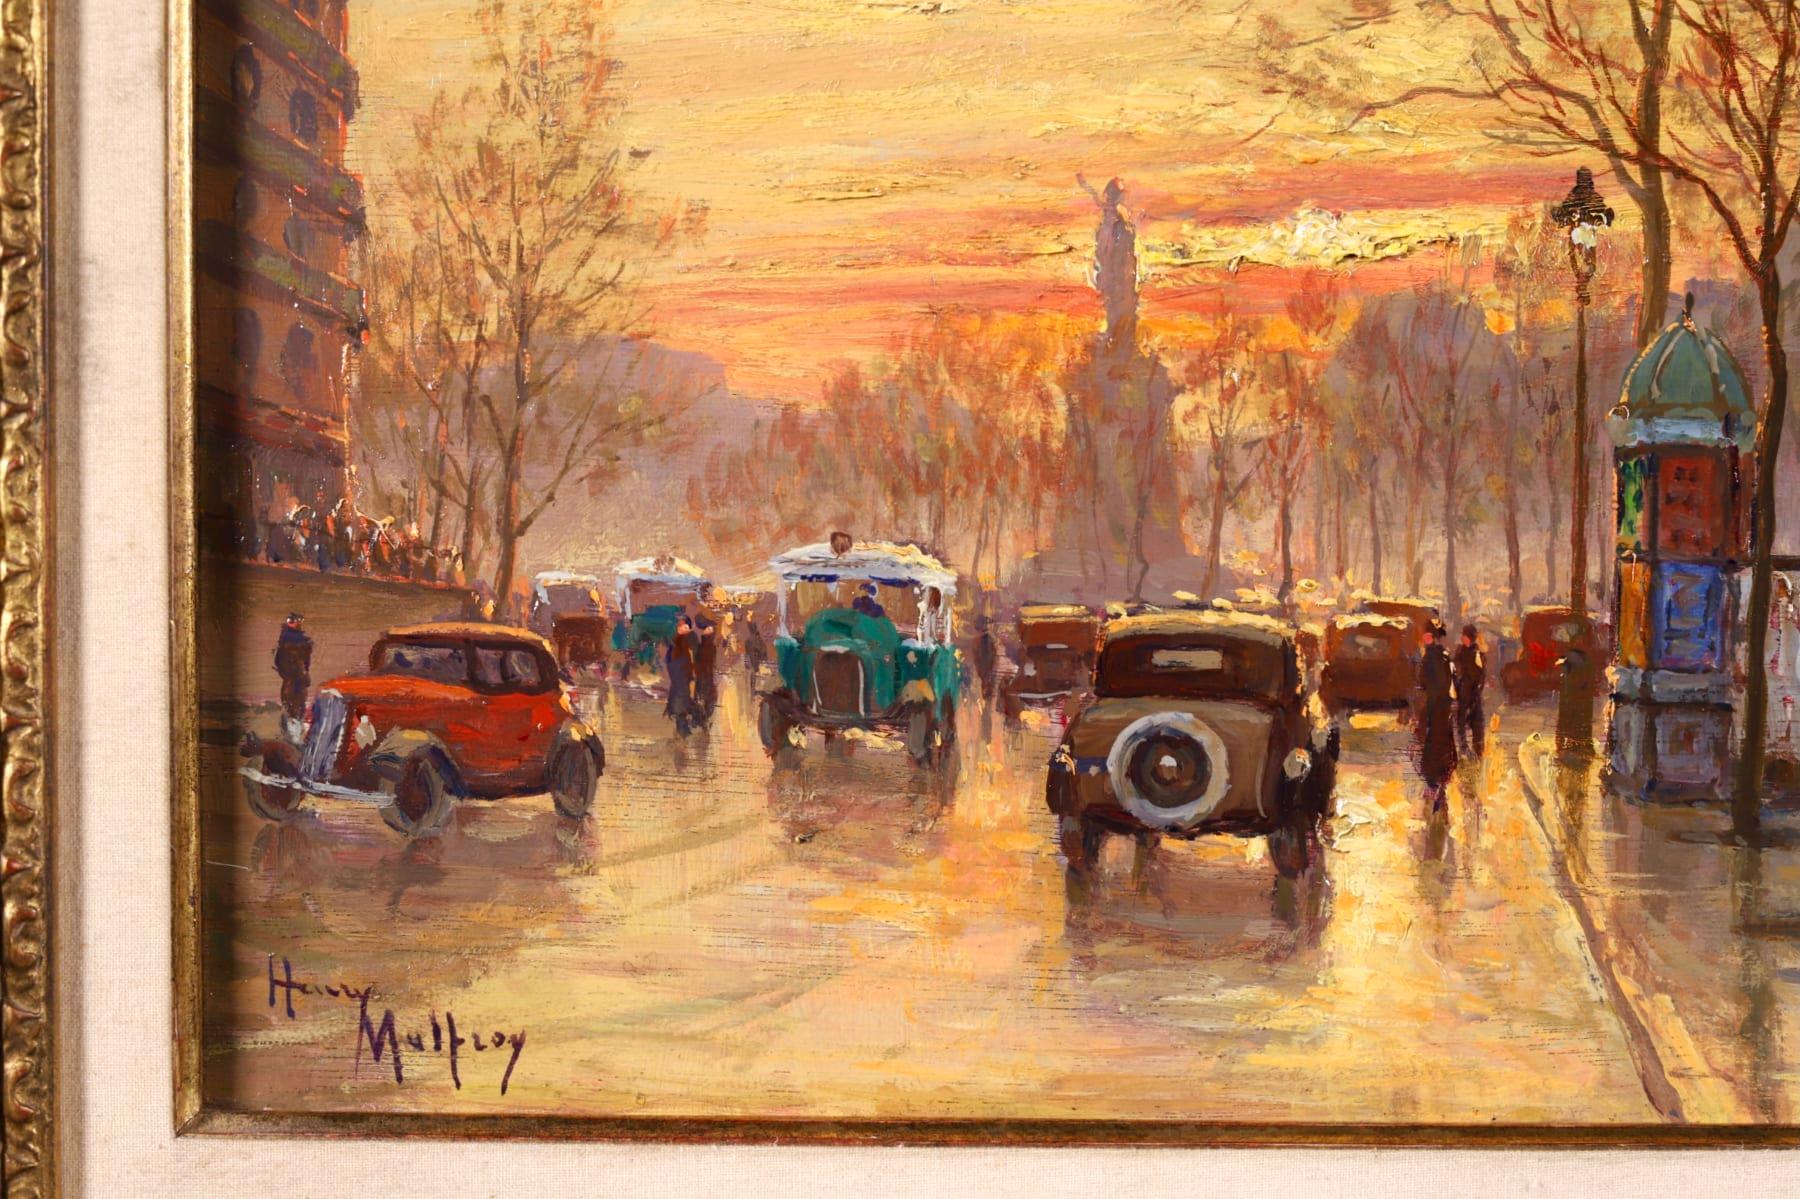 Sunset - Paris - Post Impressionist Oil, Figutres in Cityscape by Henry Malfroy 9